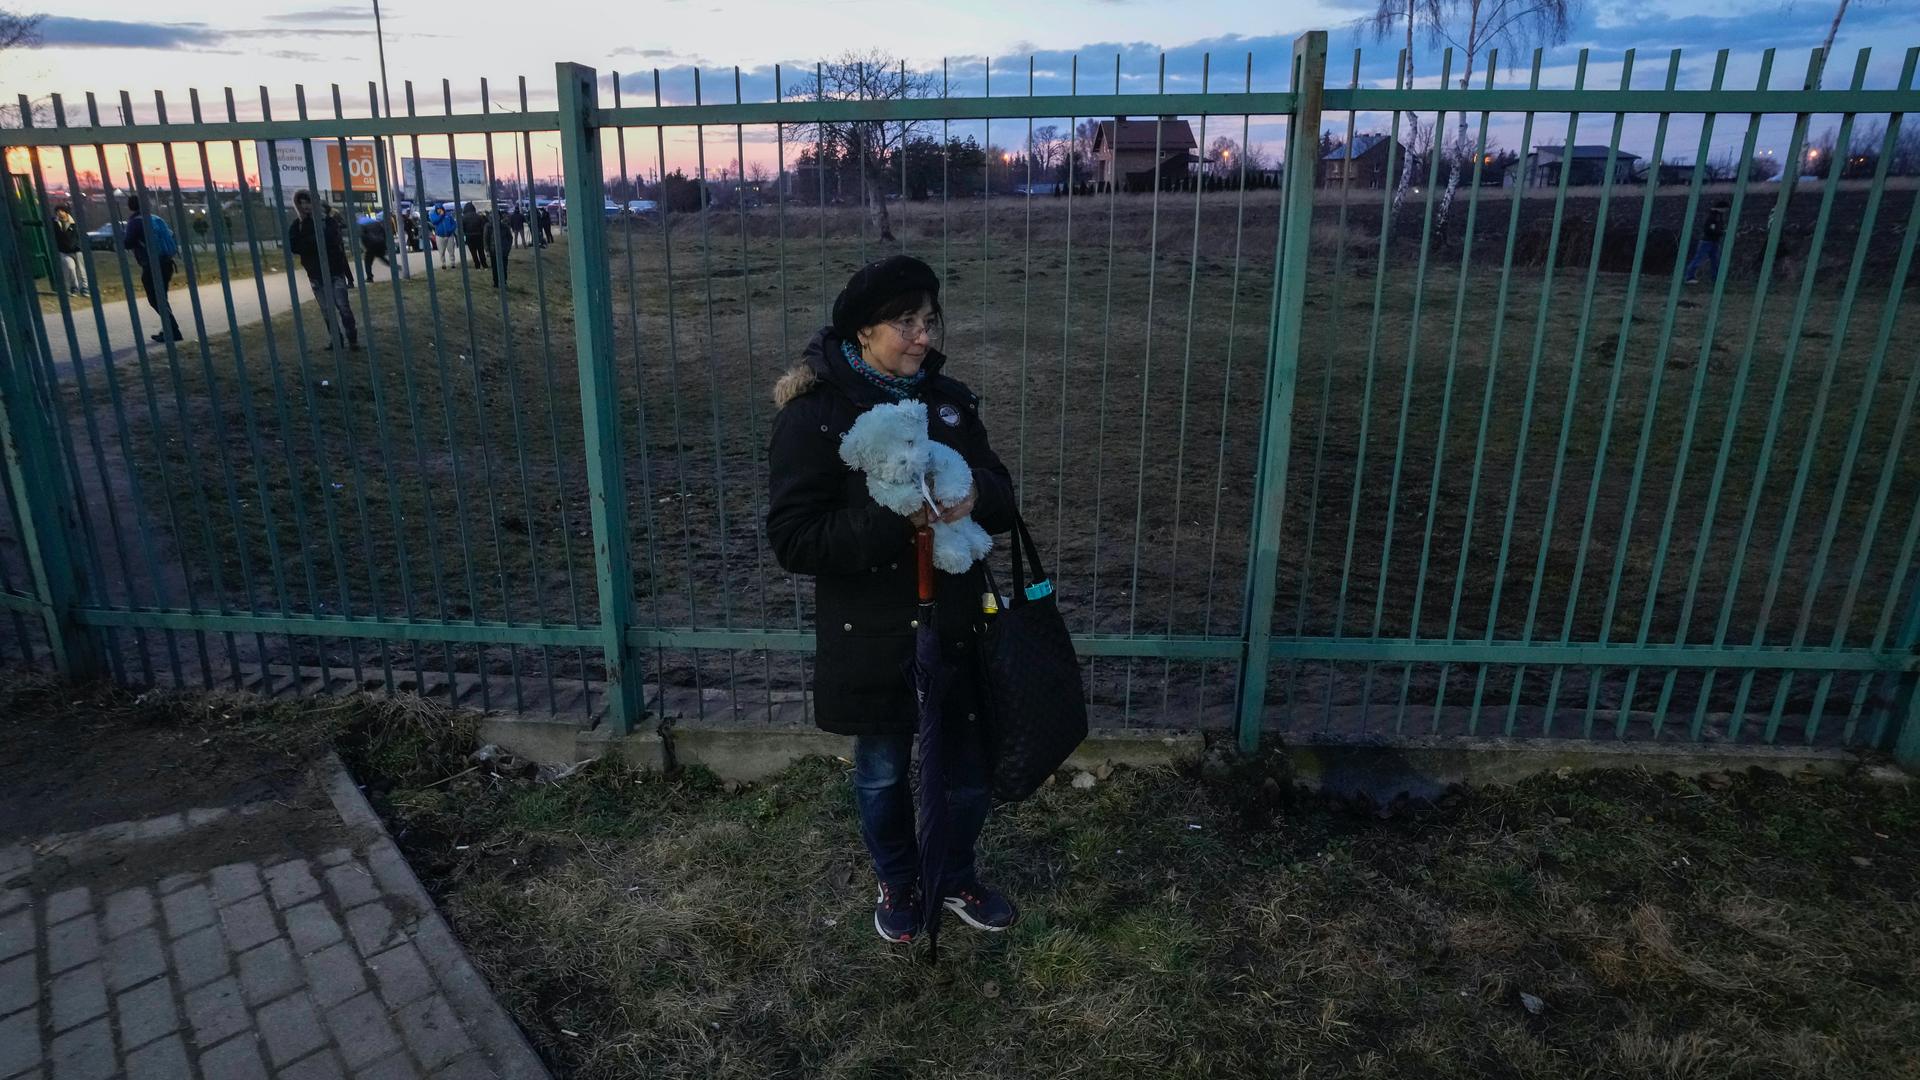 A Ukrainian woman waits for relatives fleeing the conflict from neighboring Ukraine at the border crossing in Medyka, southeastern Poland, on Feb. 25, 2022. UN officials said that 100,000 people were believed to have left their homes and estimated up to 4